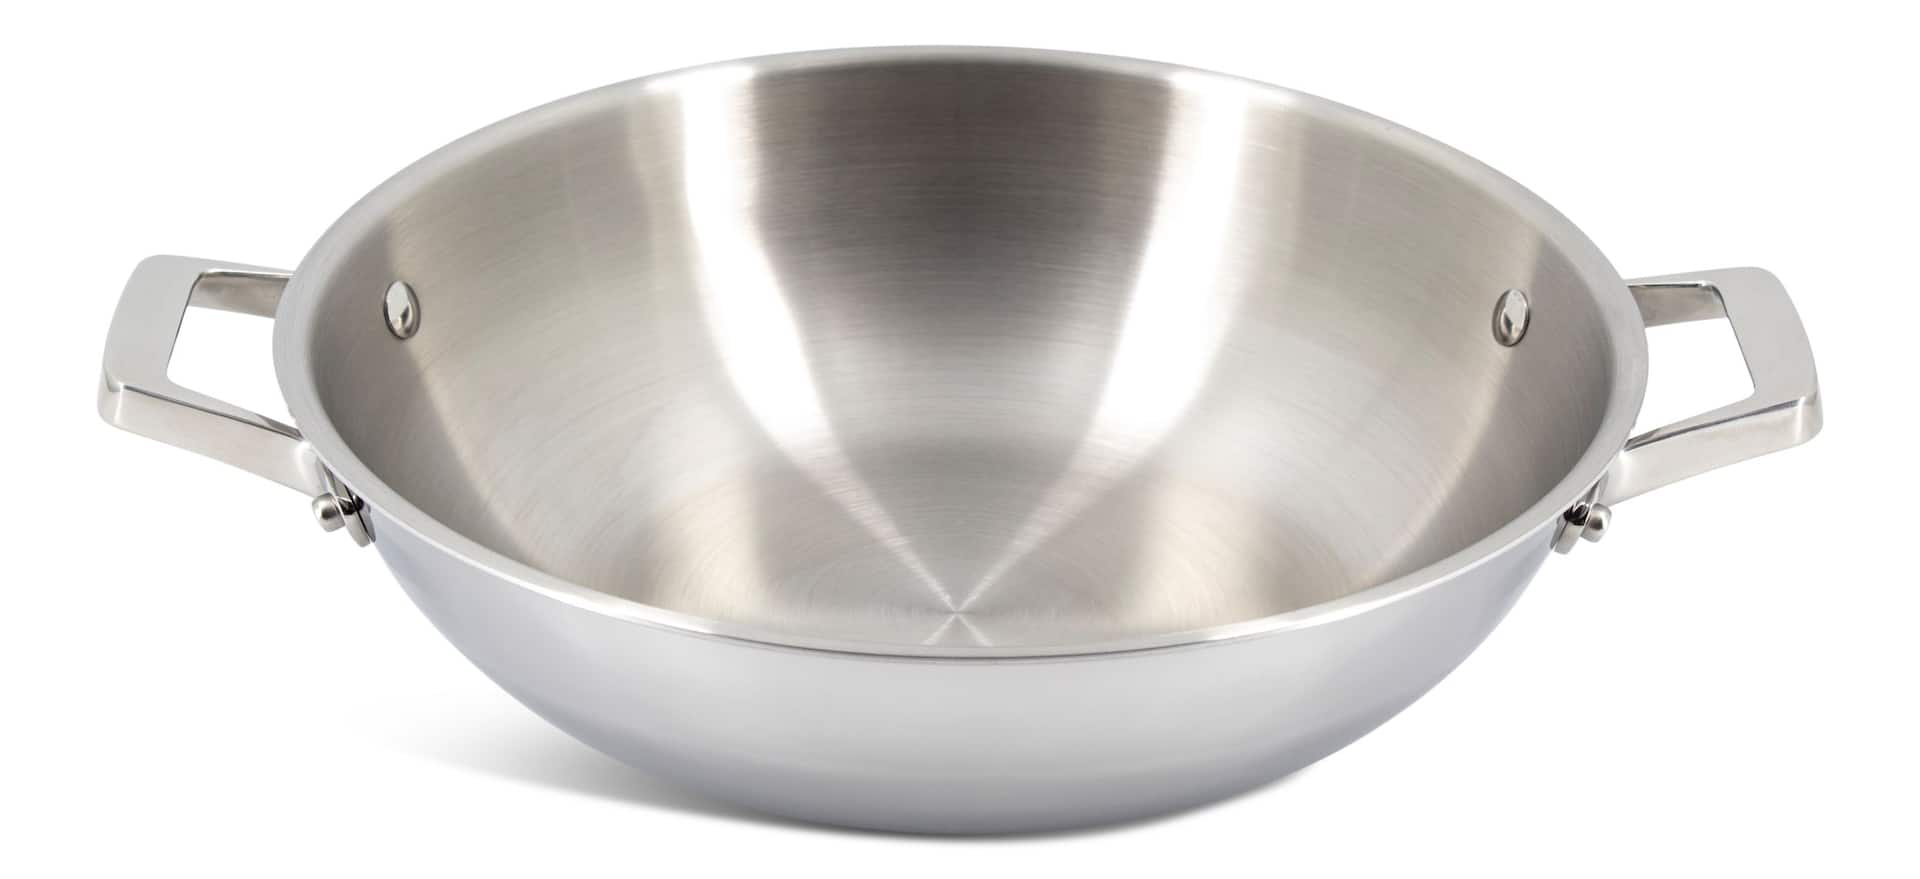 https://media-www.canadiantire.ca/product/living/kitchen/cookware/1427394/paderno-32cm-3-ply-clad-stainless-steel-wok-298046f3-5e3b-4654-b478-6f24ef71deda-jpgrendition.jpg